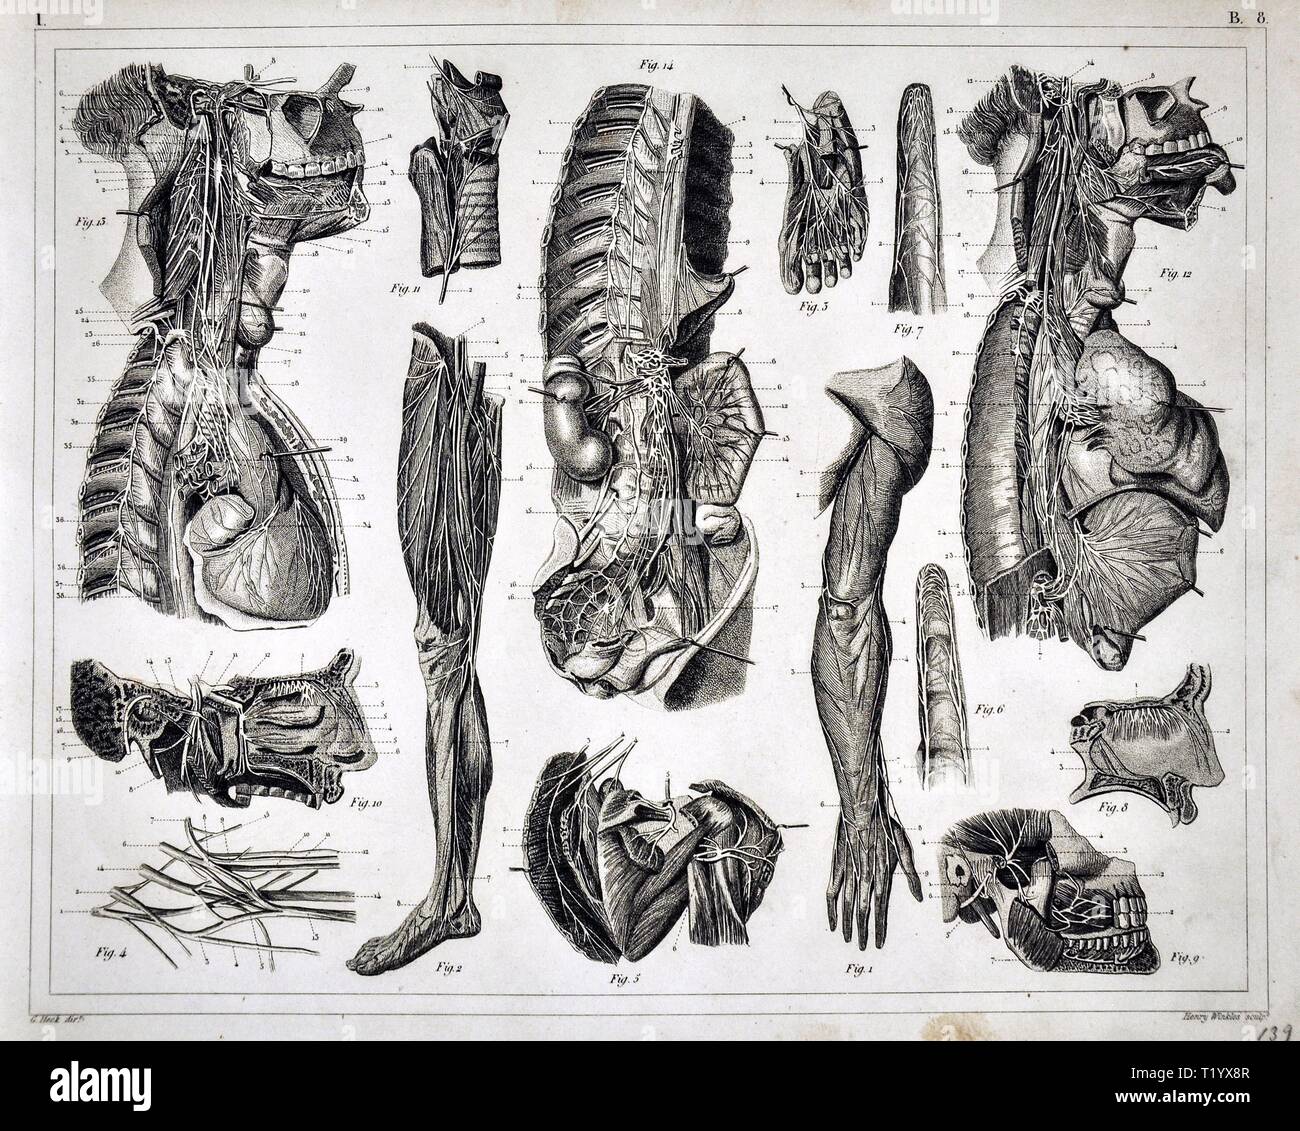 1849 Anatomy Print of the Human Muscular Skeletal System Dissection Stock Photo